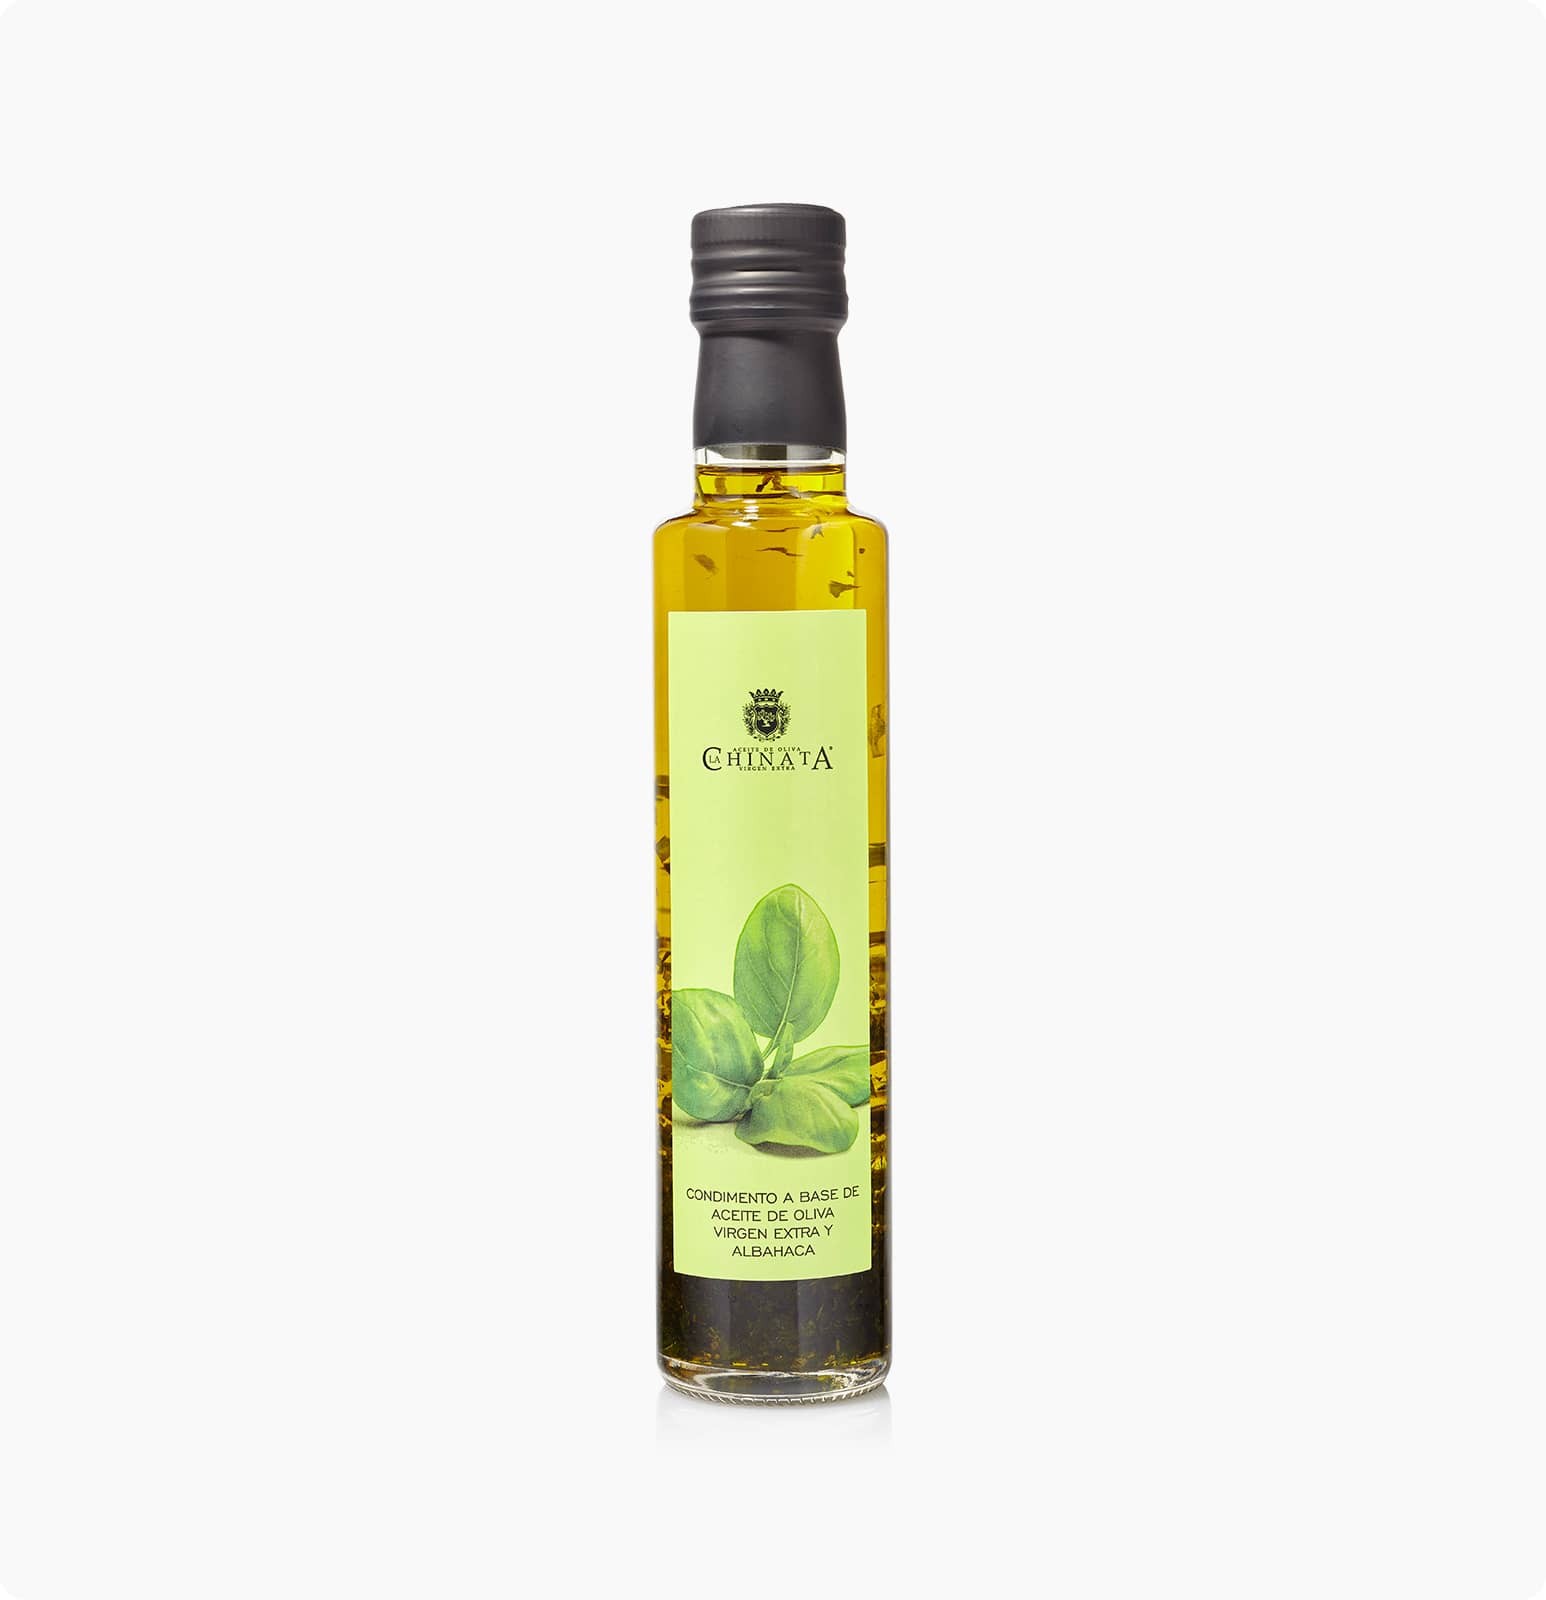 Olive oil flavored with basil